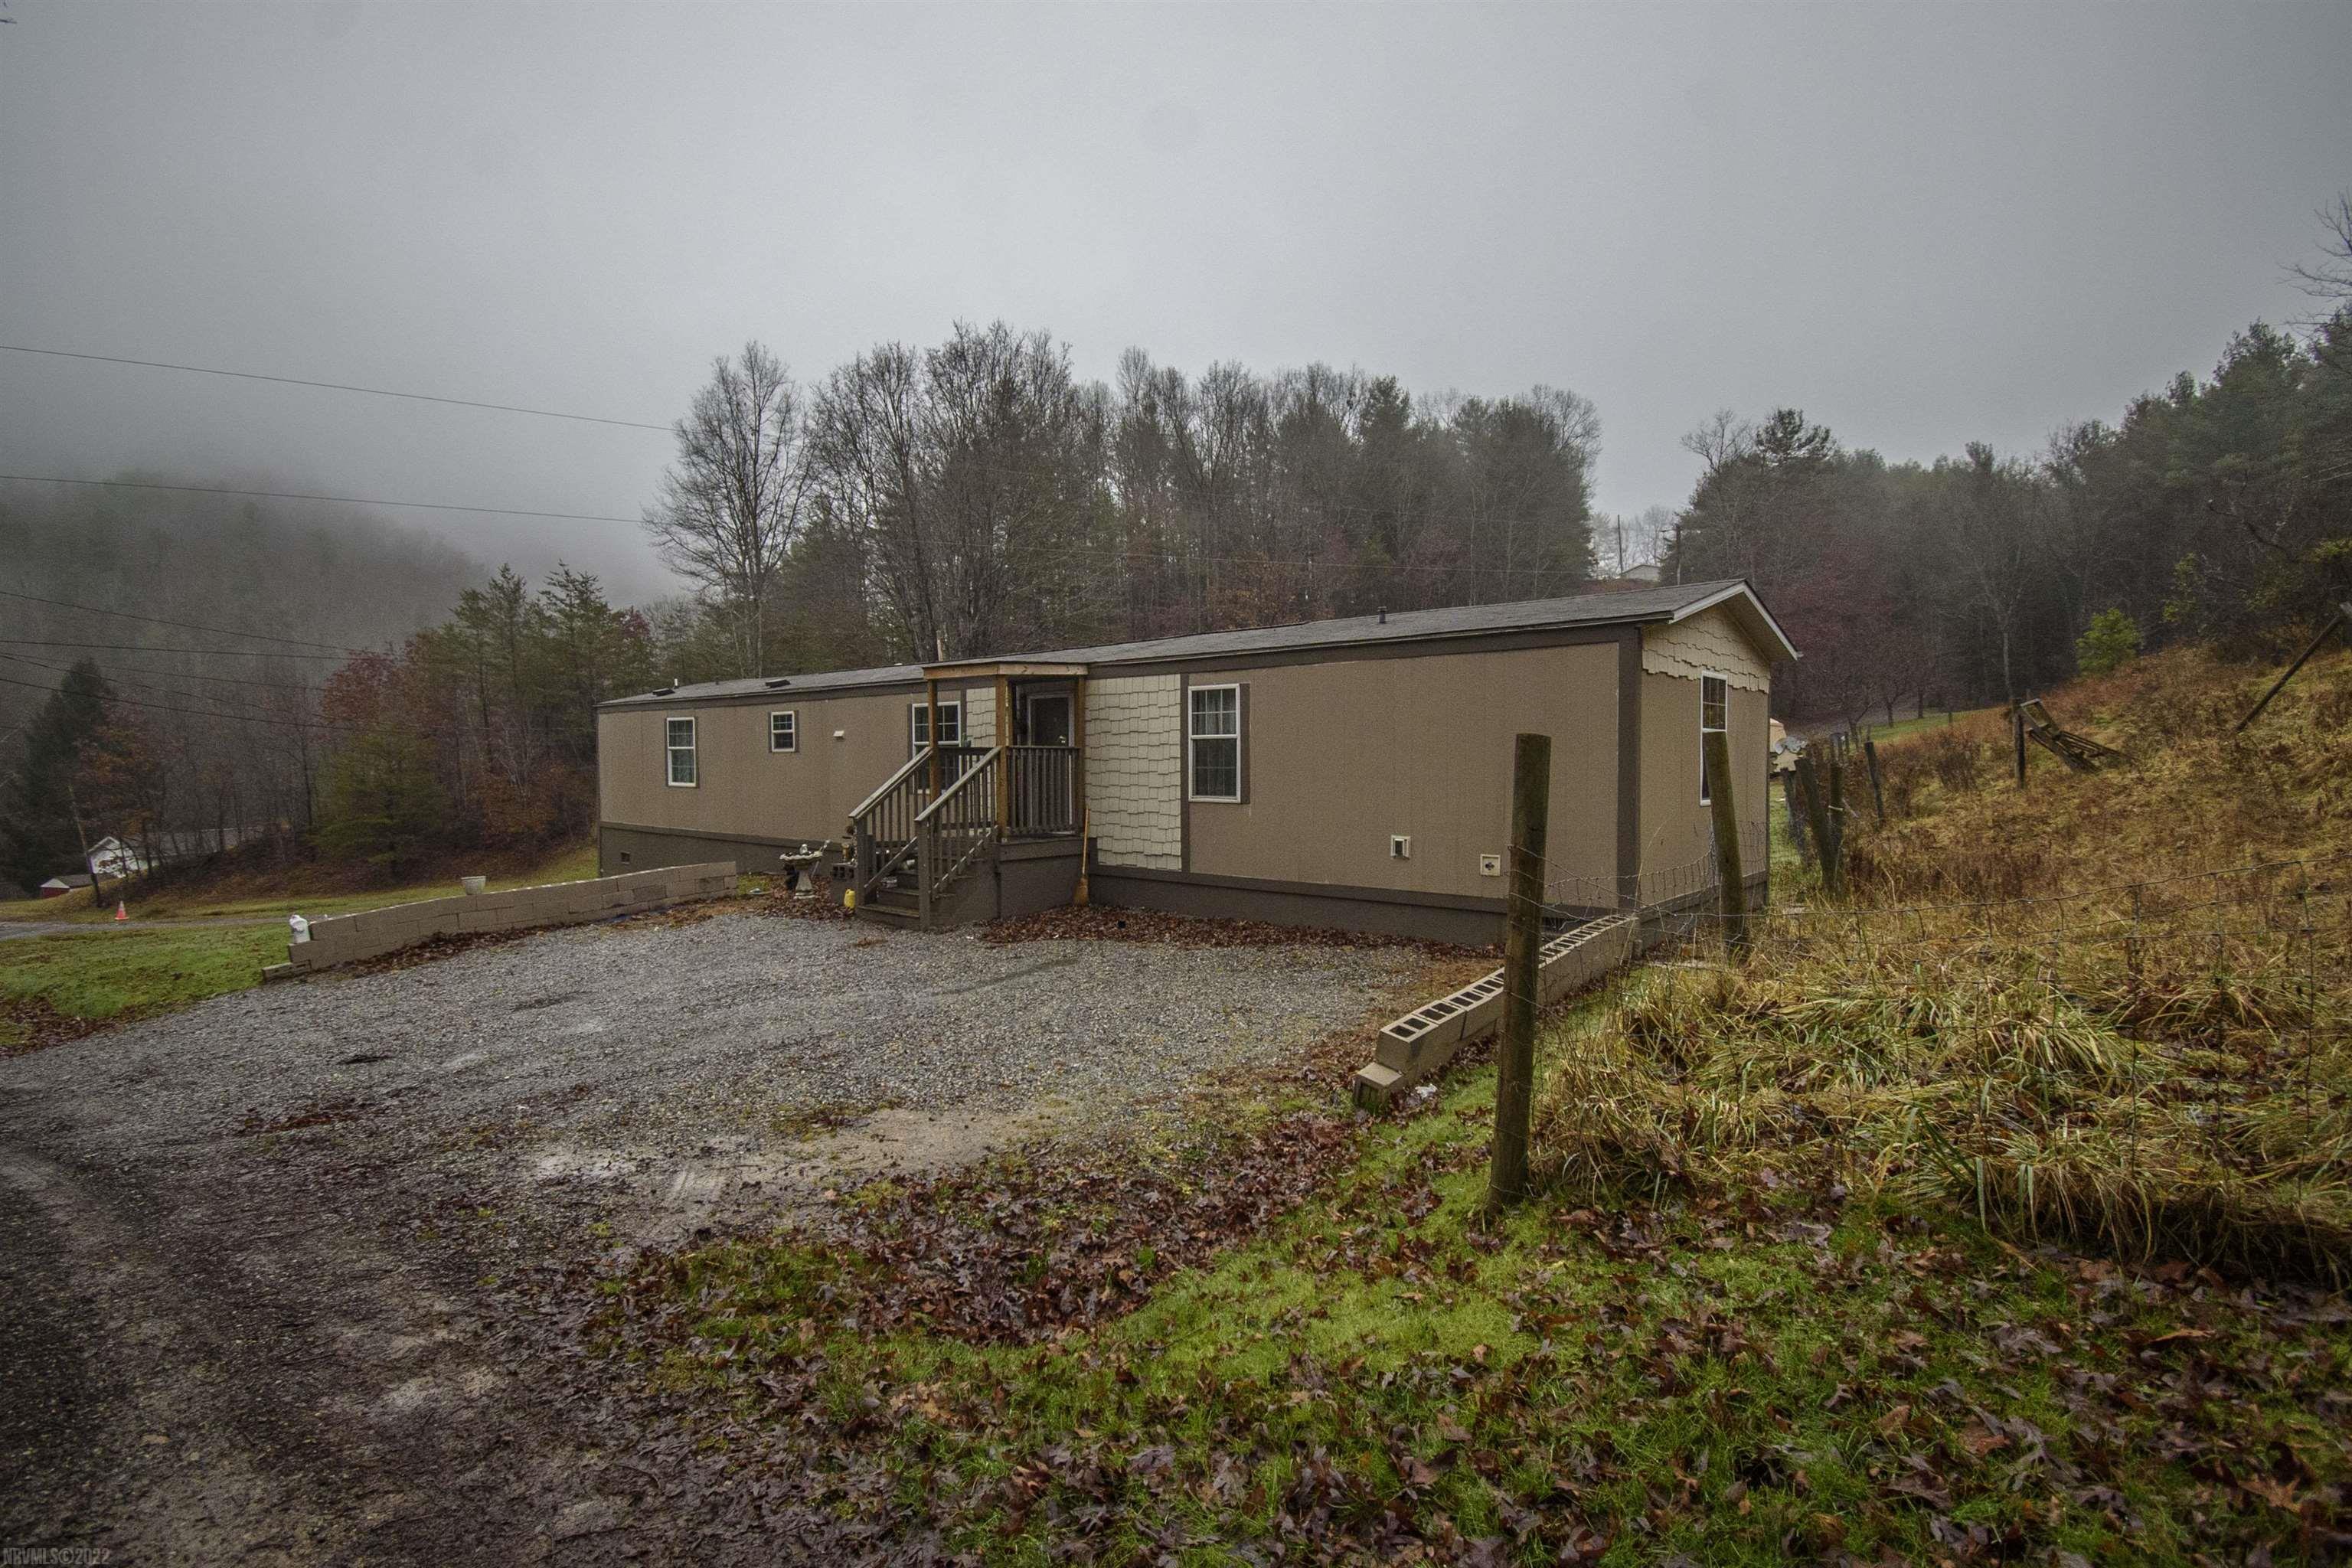 INVESTMENT OPPORTUNITY! Sitting on over 2 acres, this home would make the perfect rental property to add to your portfolio.  Don't let this slip through your fingers!